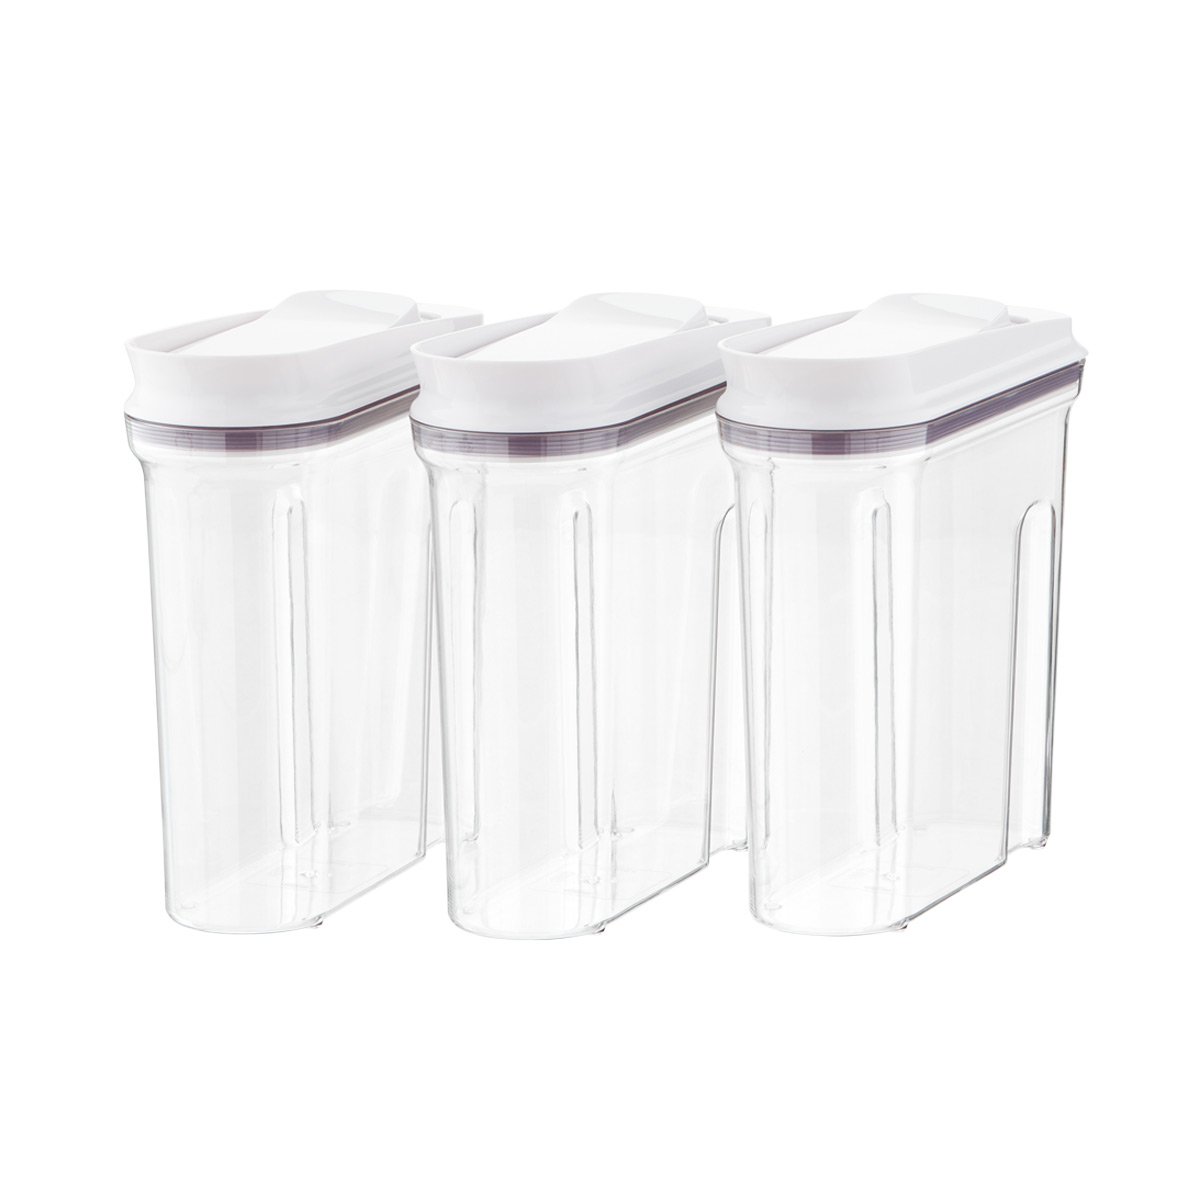 OXO Good Grips 2.5 Qt. POP Food Storage Container with Airtight